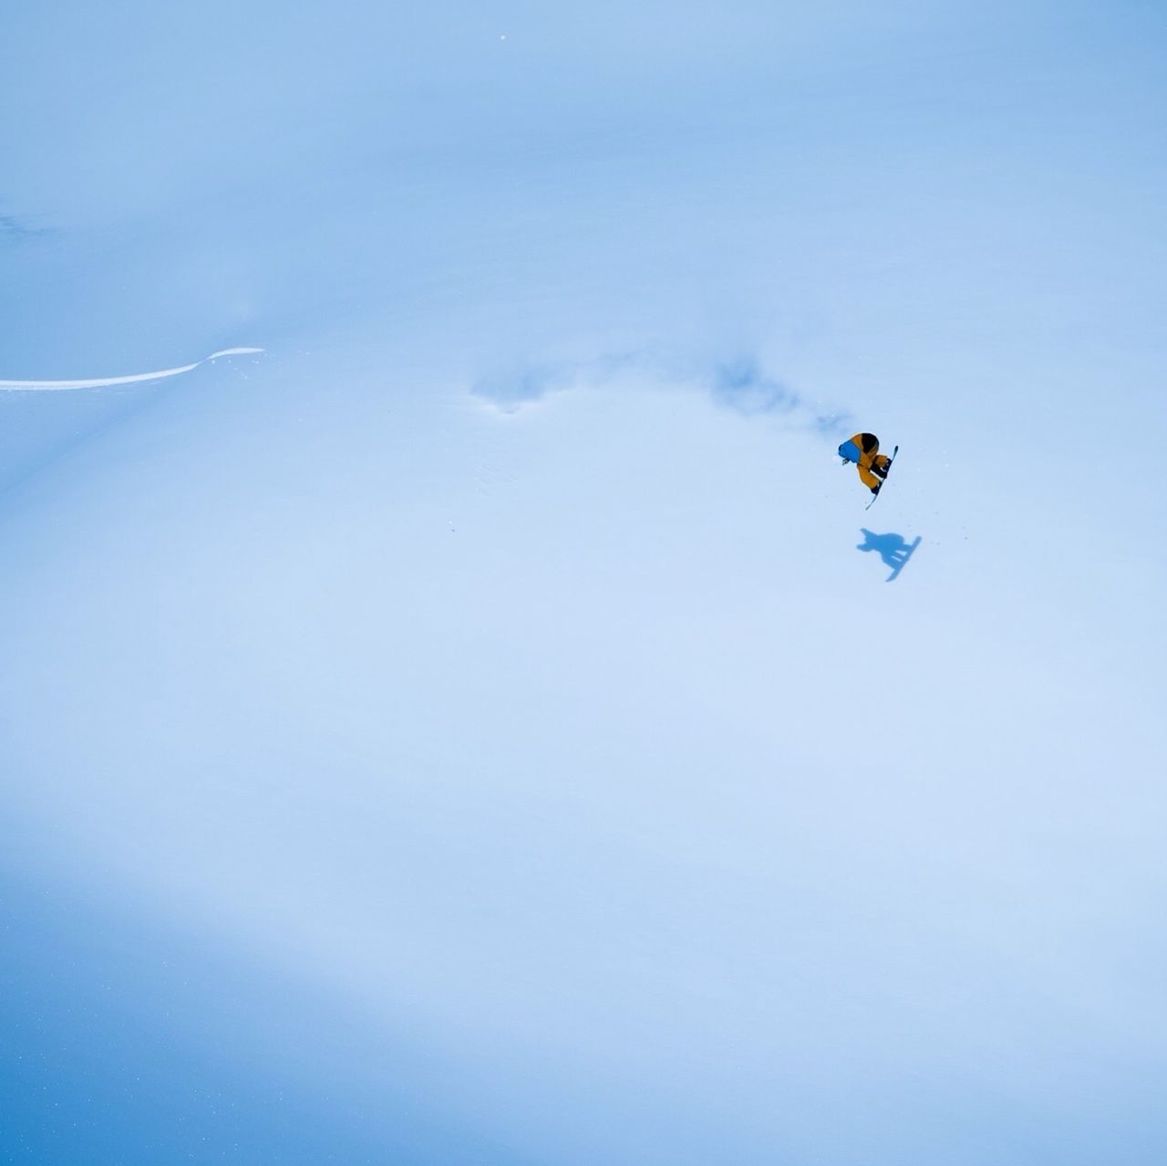 Aerial view of person snowboarding